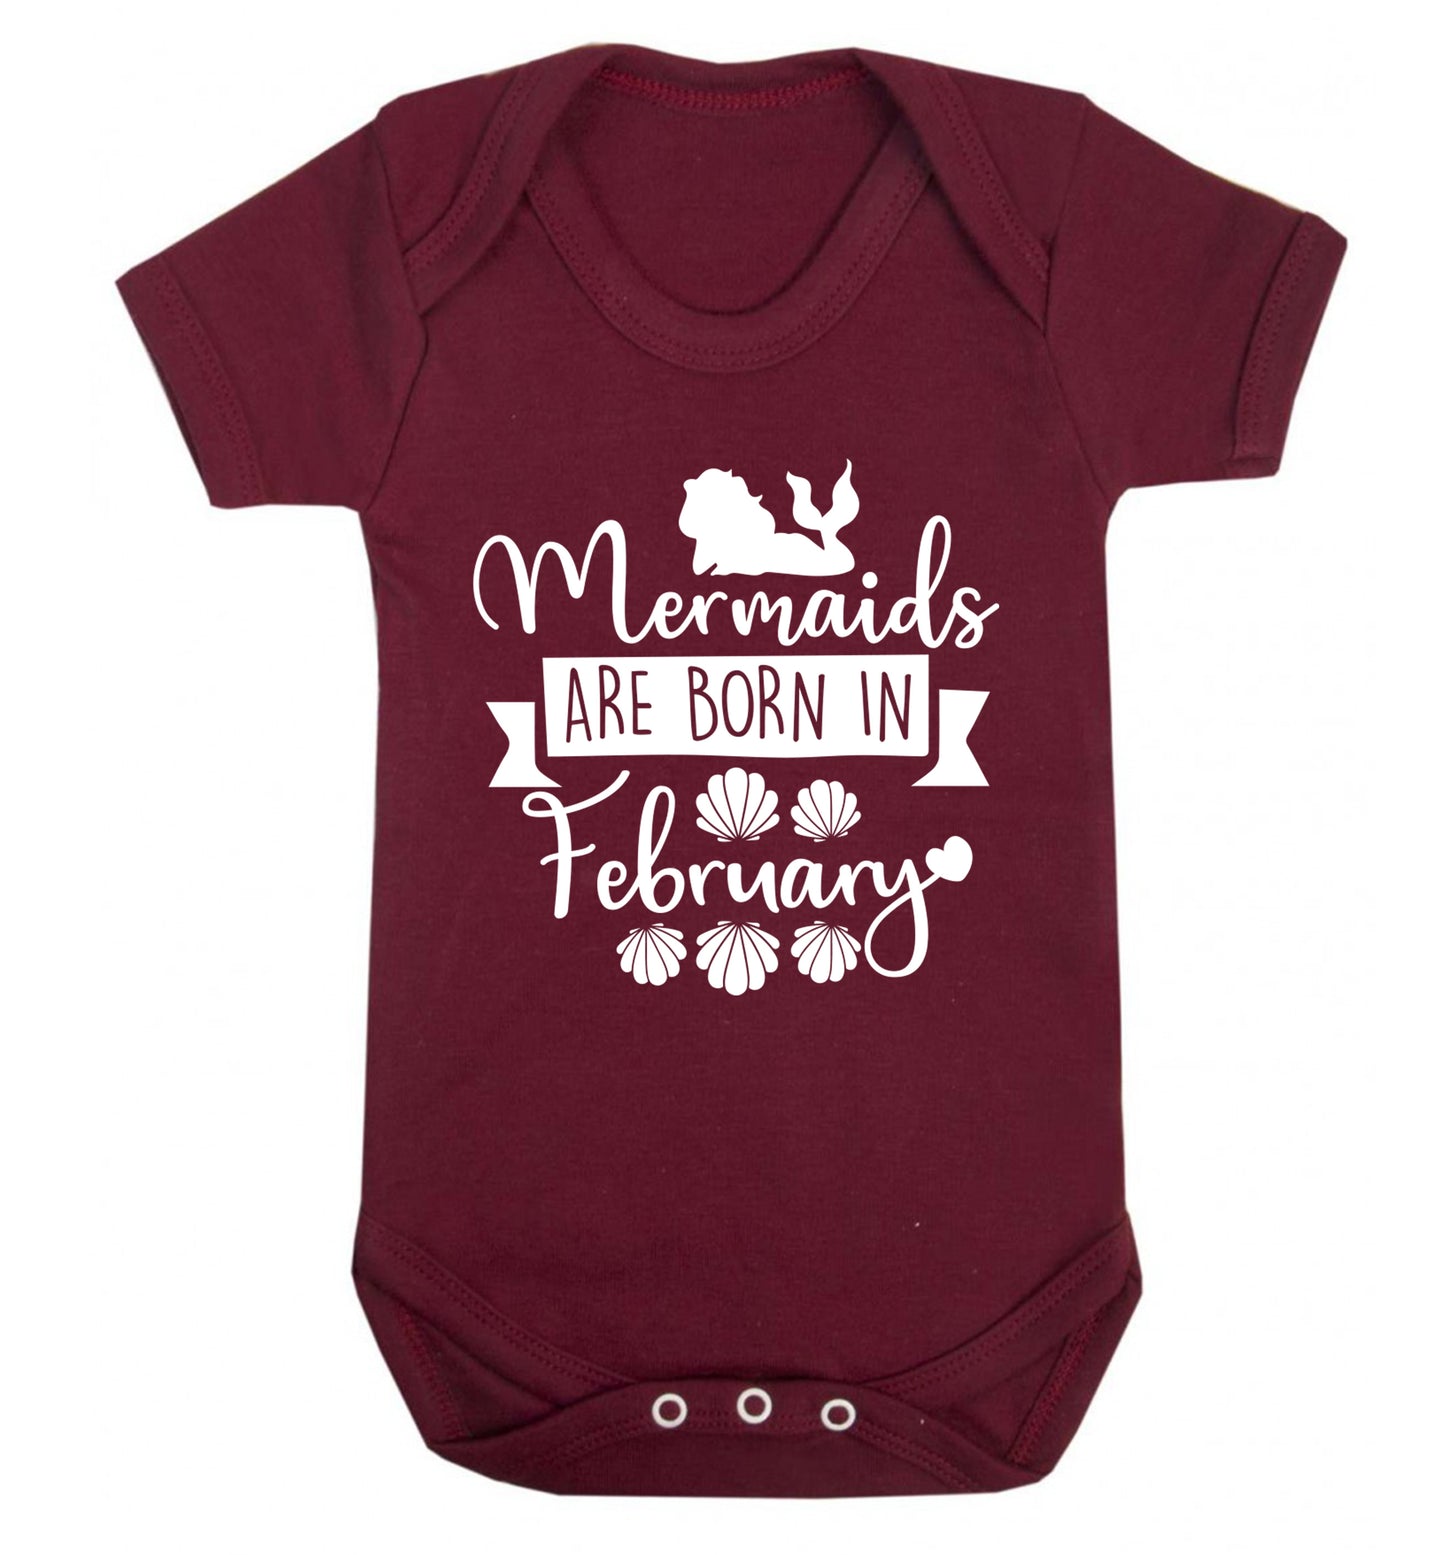 Mermaids are born in February Baby Vest maroon 18-24 months